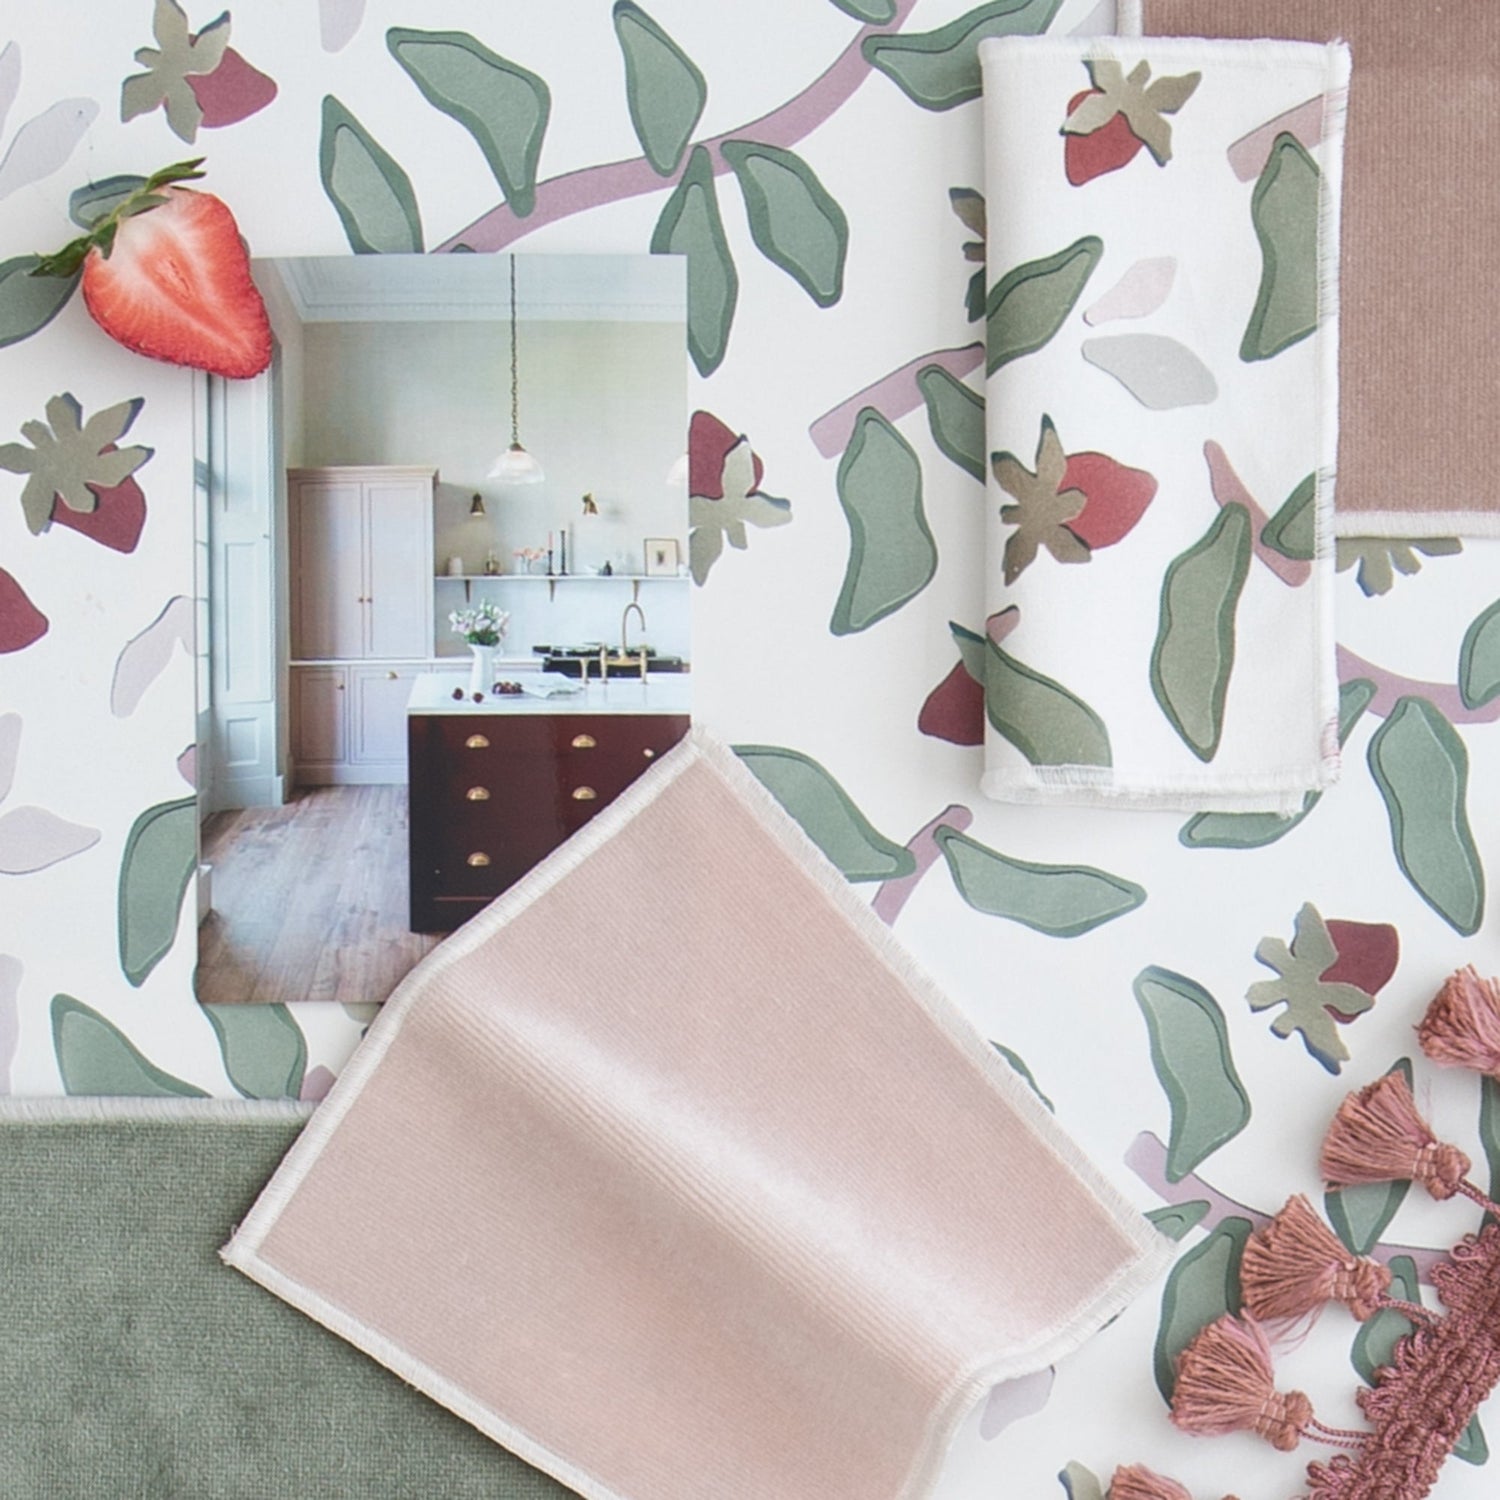 Interior design moodboard and fabric inspirations with Pink Velvet swatch, Mauve Velvet Swatch, Fern Green Velvet Swatch and Strawberry & Botanical Printed Swatch